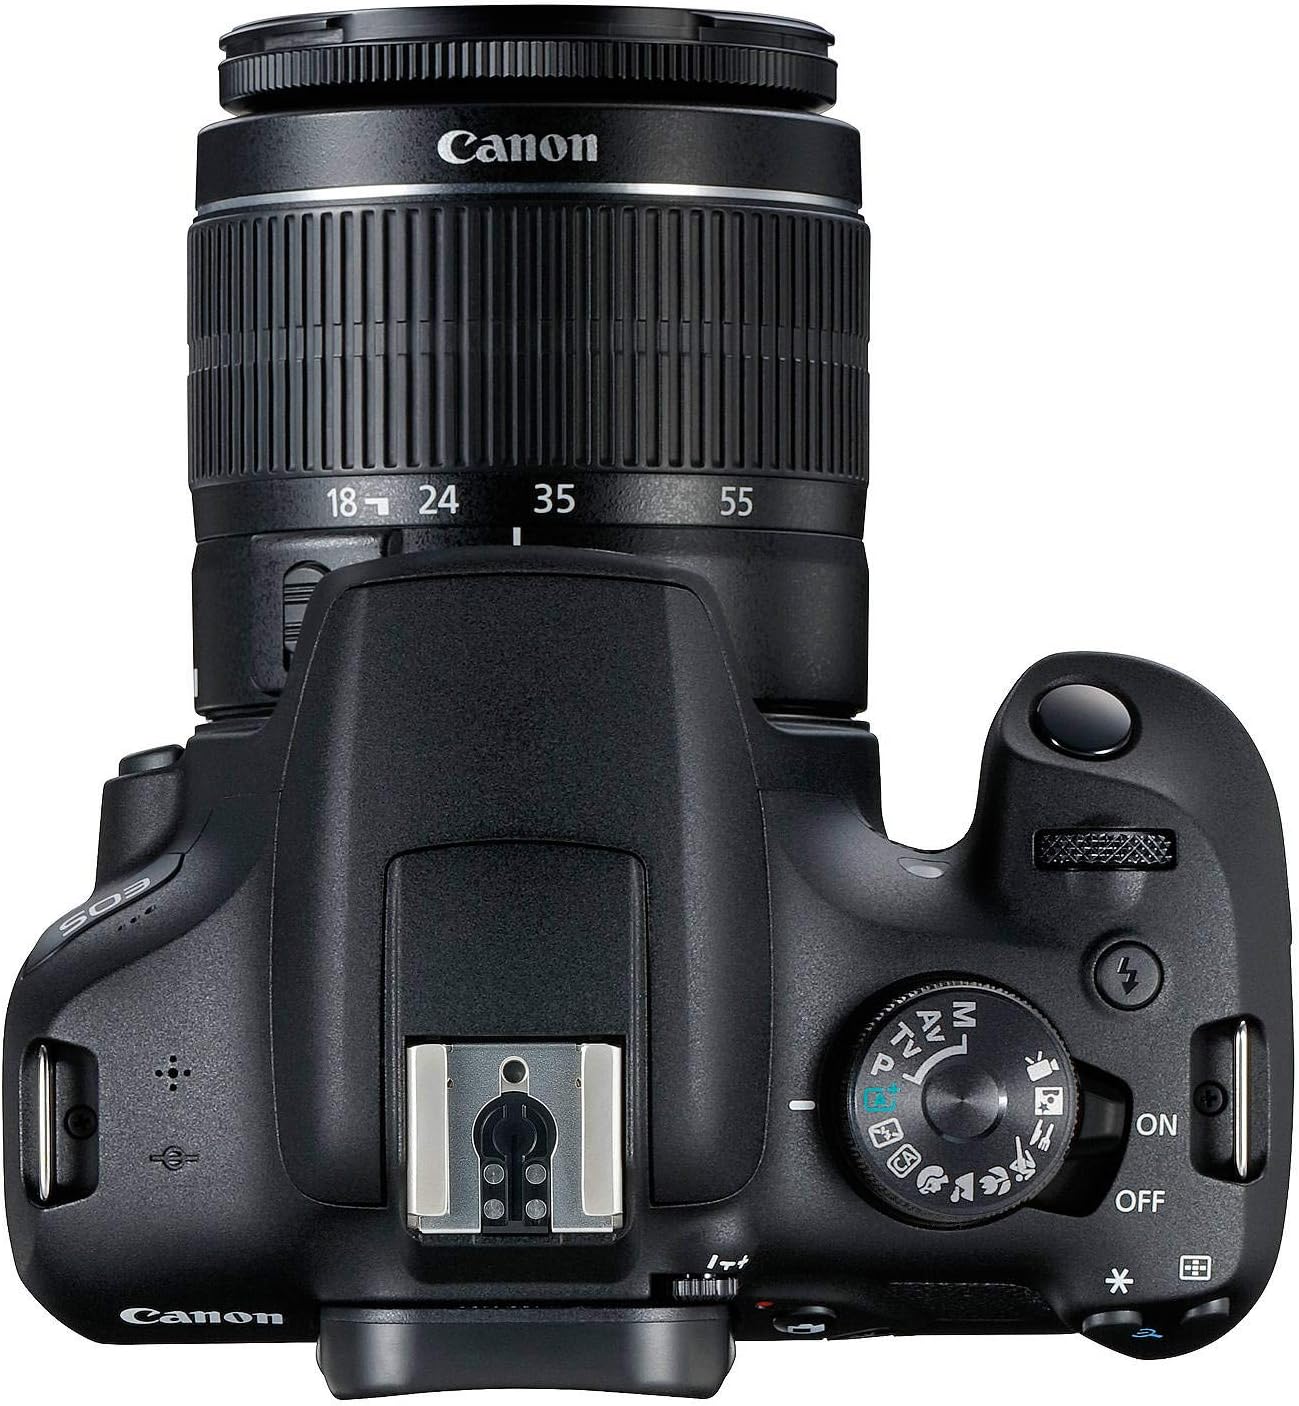 Canon EOS 2000D / Rebel T7 DSLR Camera with 18-55mm Lens + Bag + 64GB Card + More - image 5 of 5